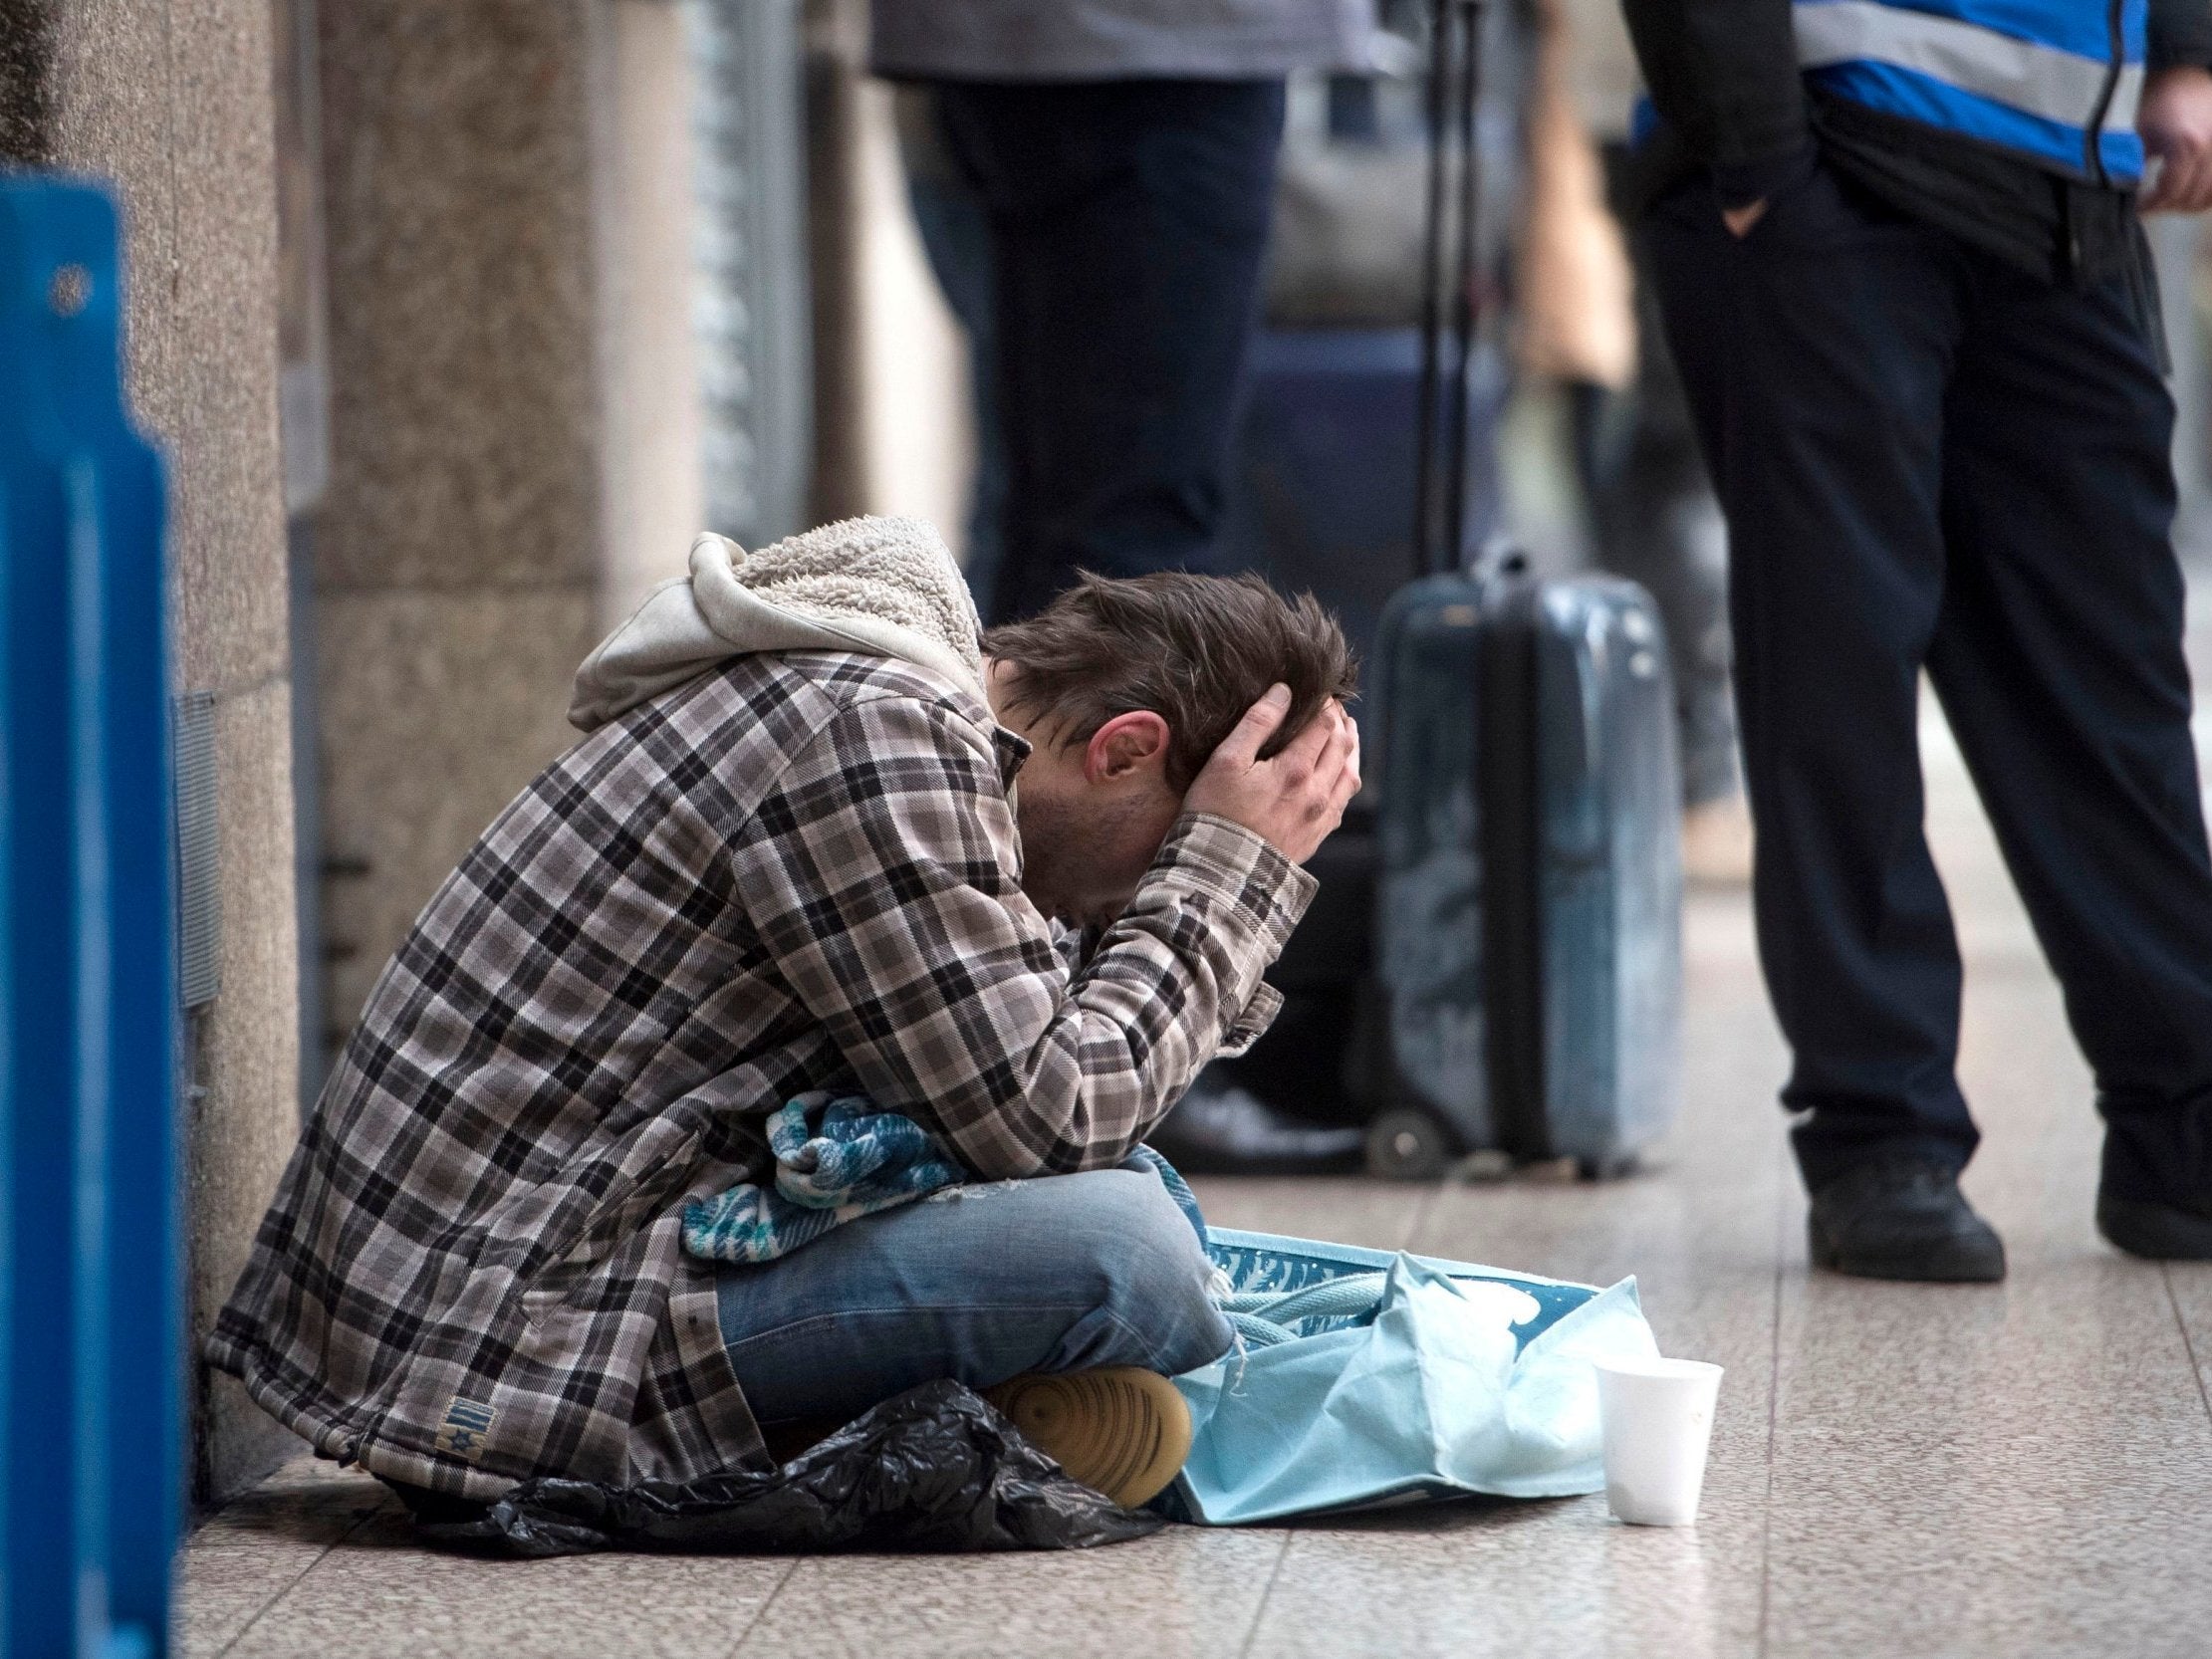 Nearly 600 homeless people died last year, figures show | The Independent